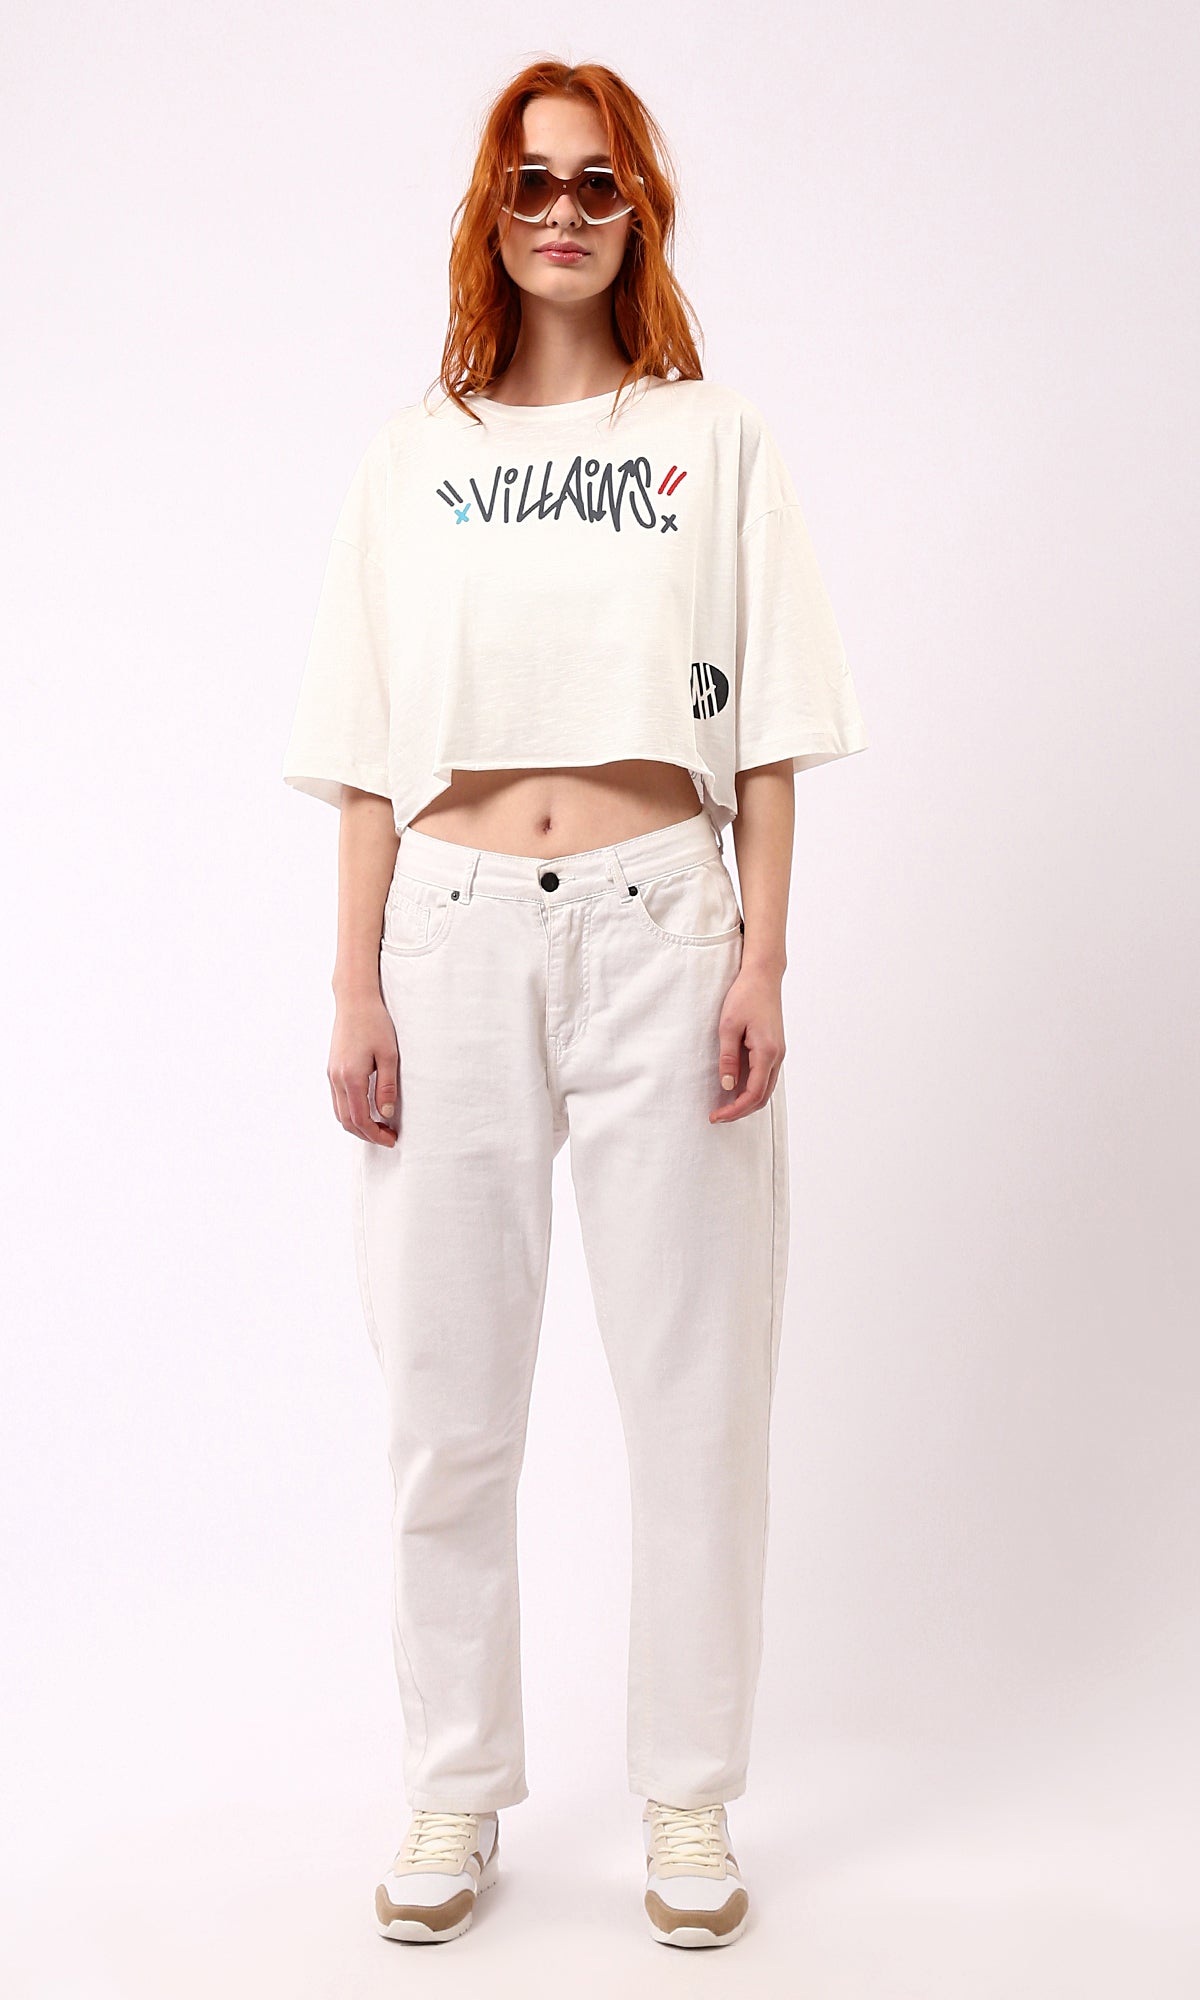 O181684 Front & Back Print Off-White Cropped Tee